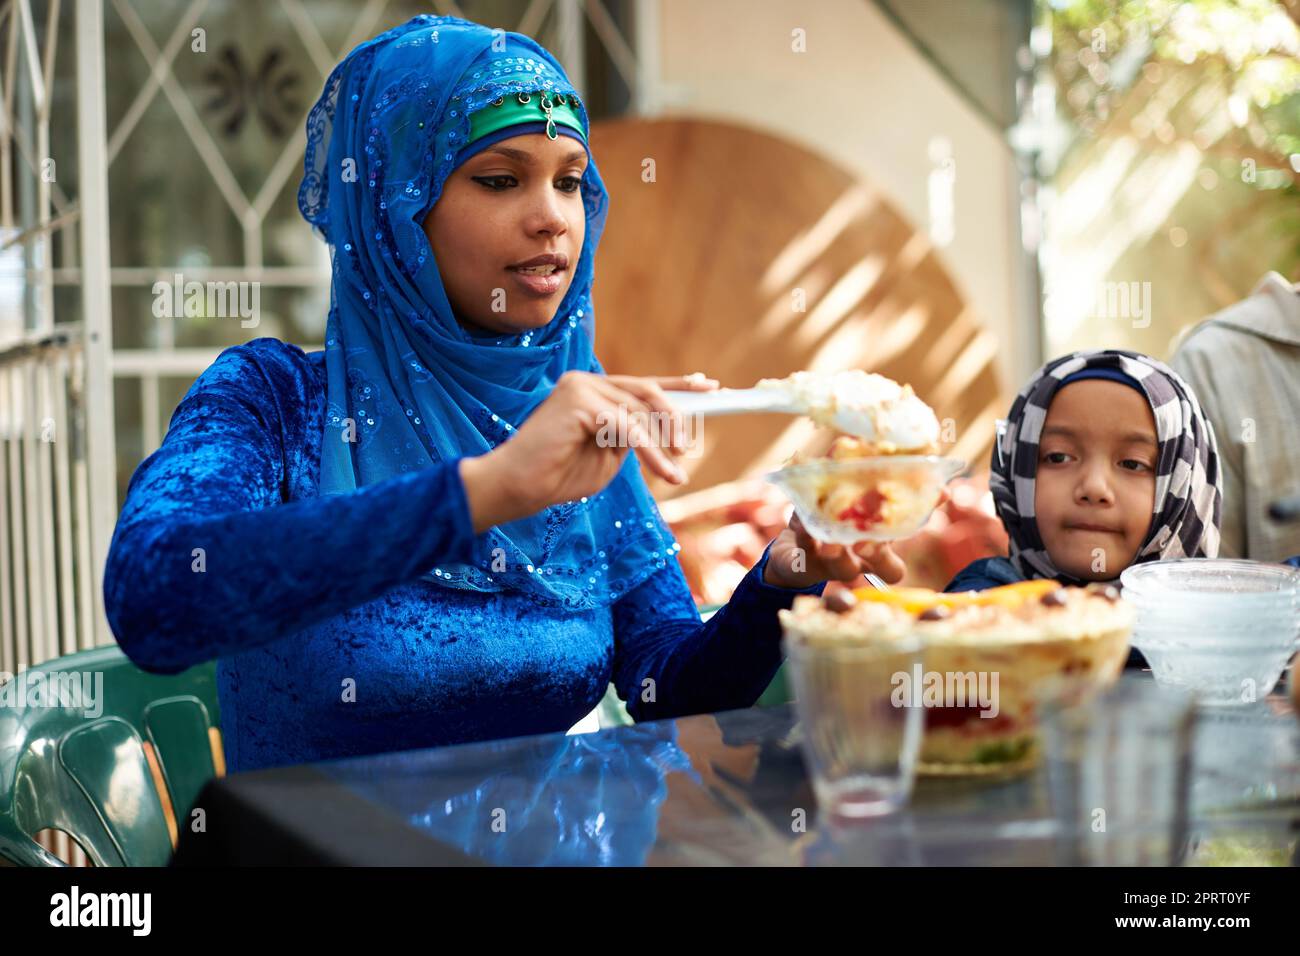 Theres always room for dessert. a muslim family eating together. Stock Photo